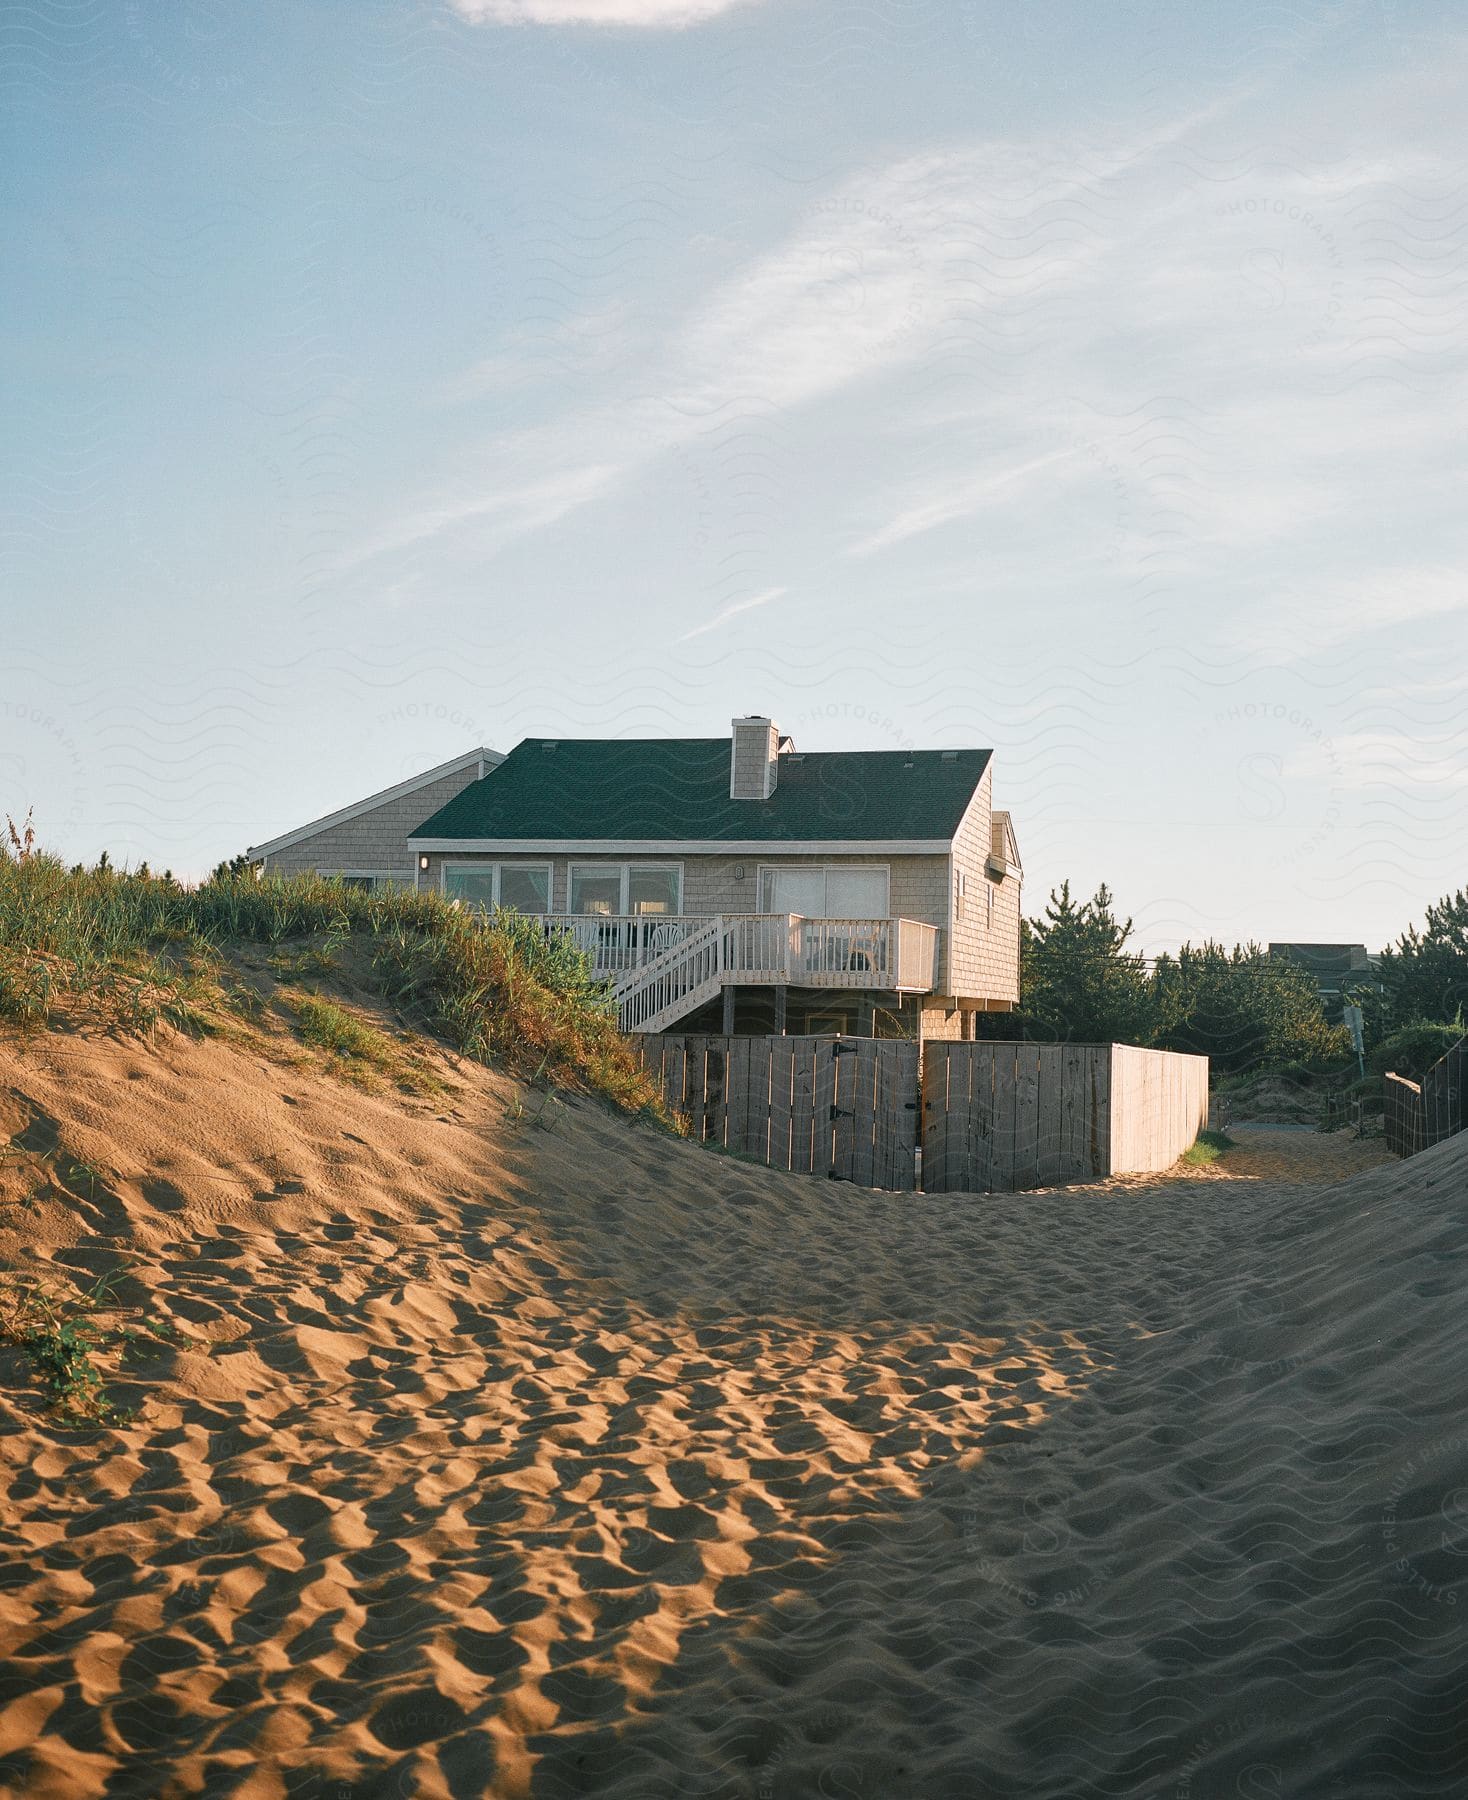 A sandy path with footprints leads to a beach house hidden behind a sand dune, with a wooden fence surrounding it.